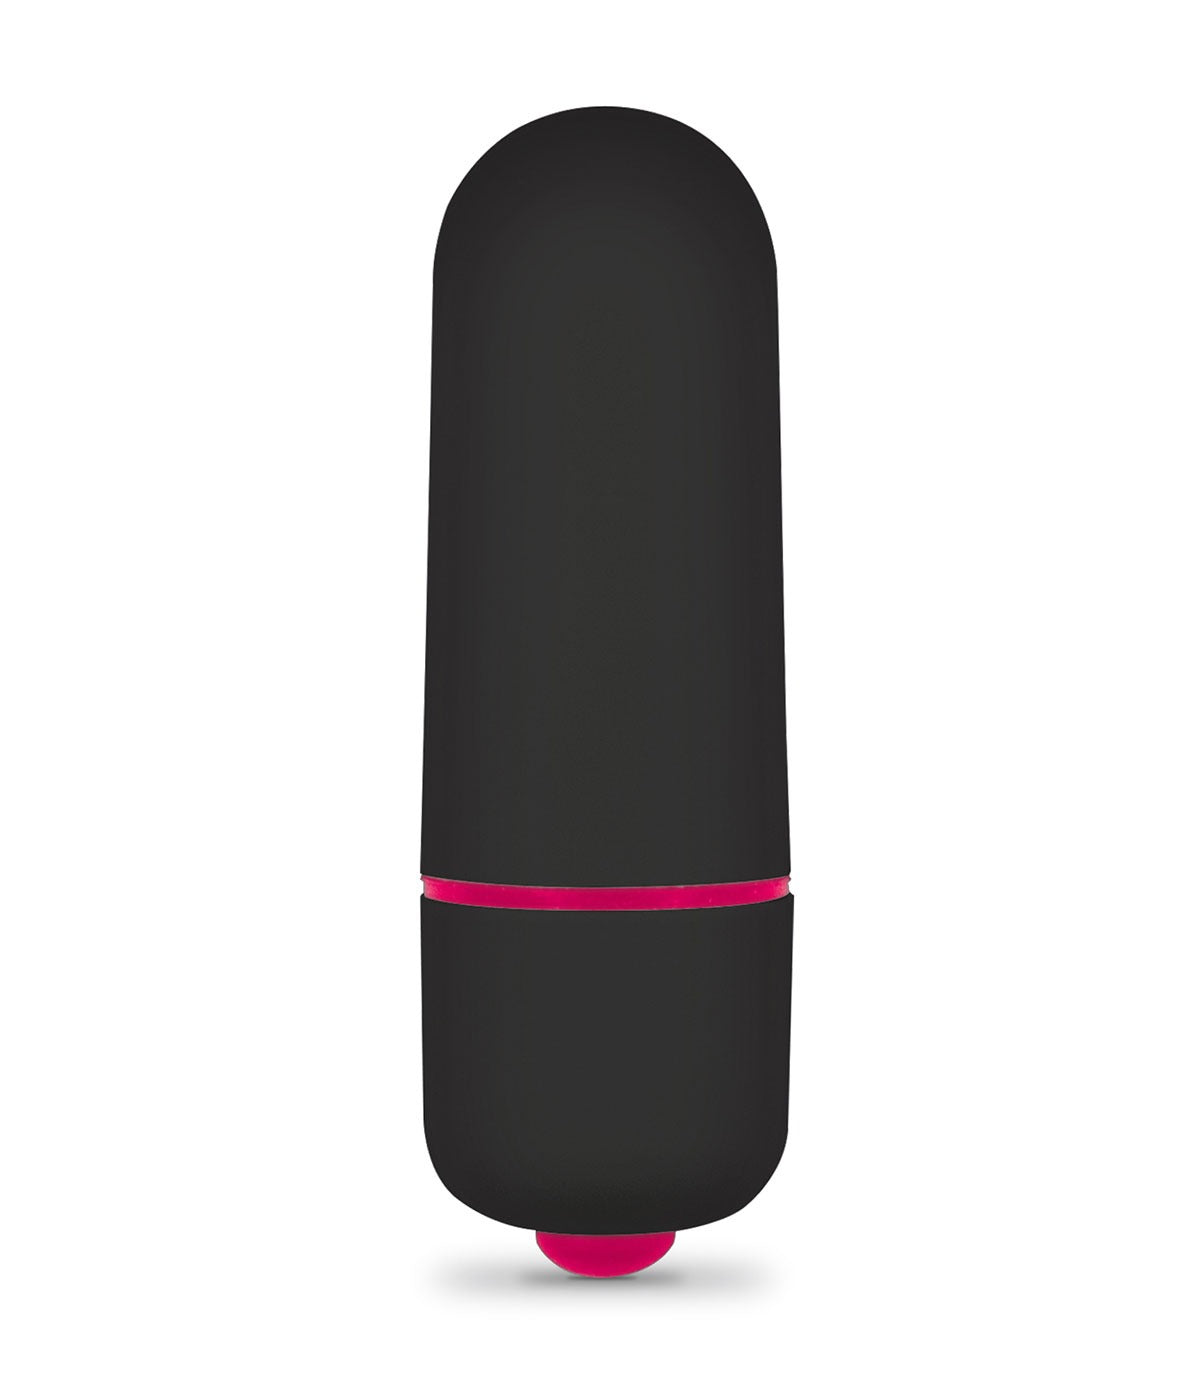 MVW Relaxxx Mini Silicone Bullet Massager - 7 Function Black